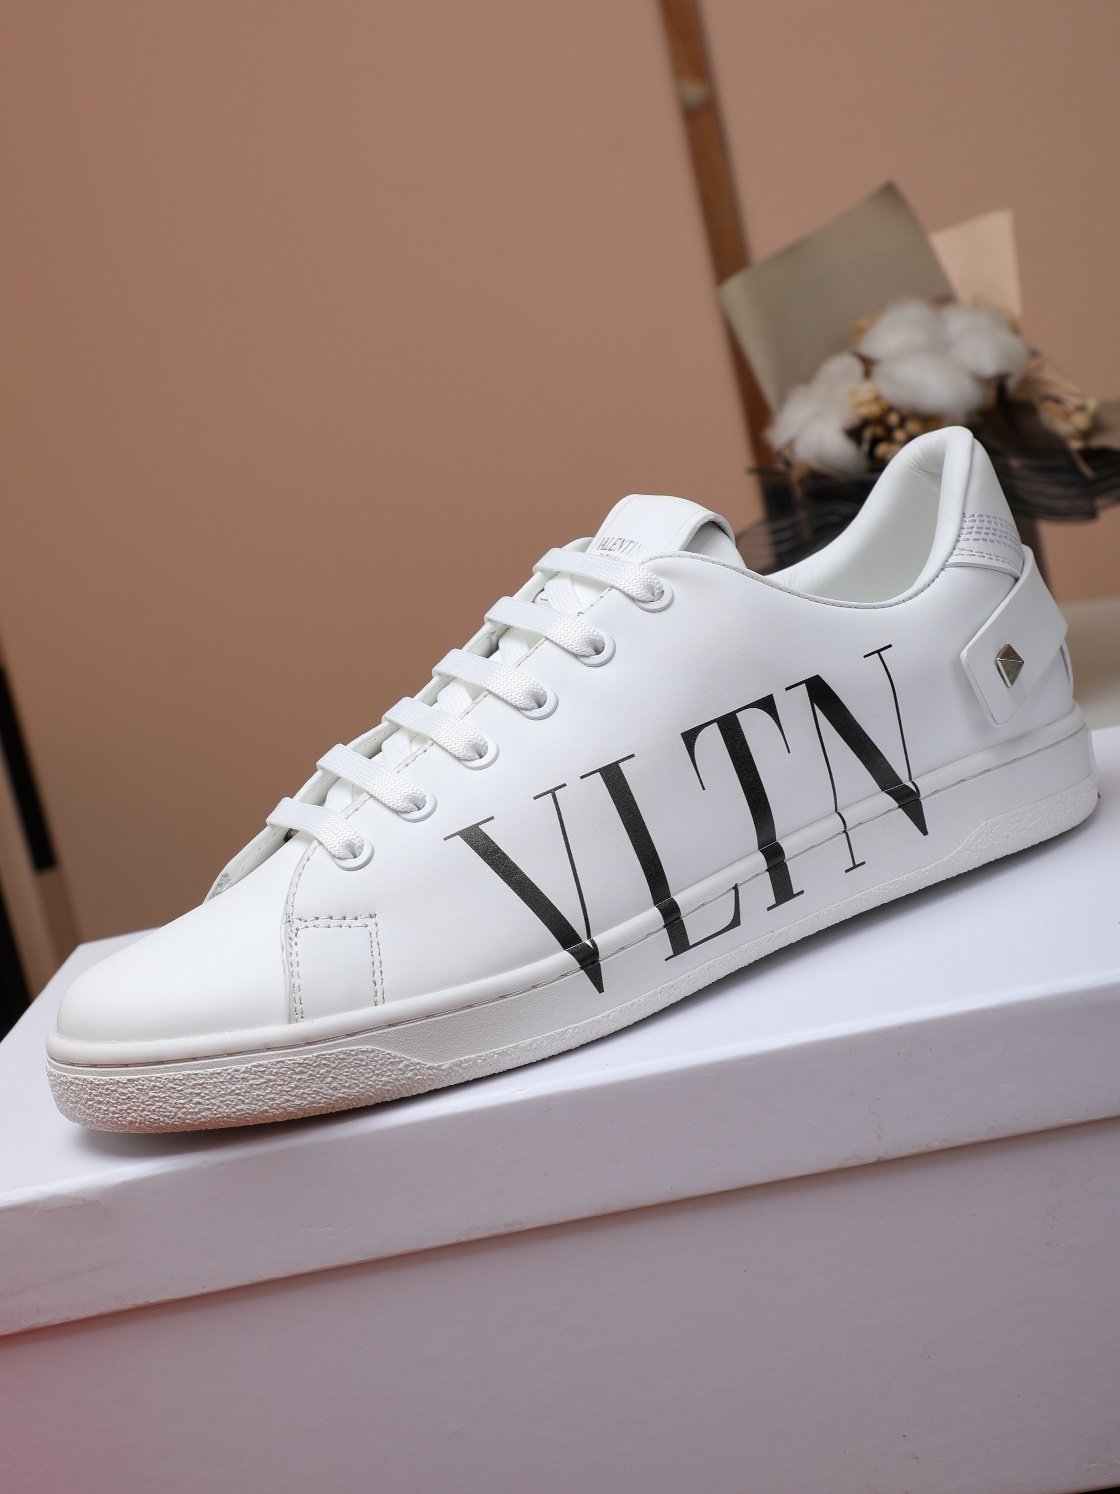 Valentino Woman's Men's 2020 New Fashion Casual Shoes Sn